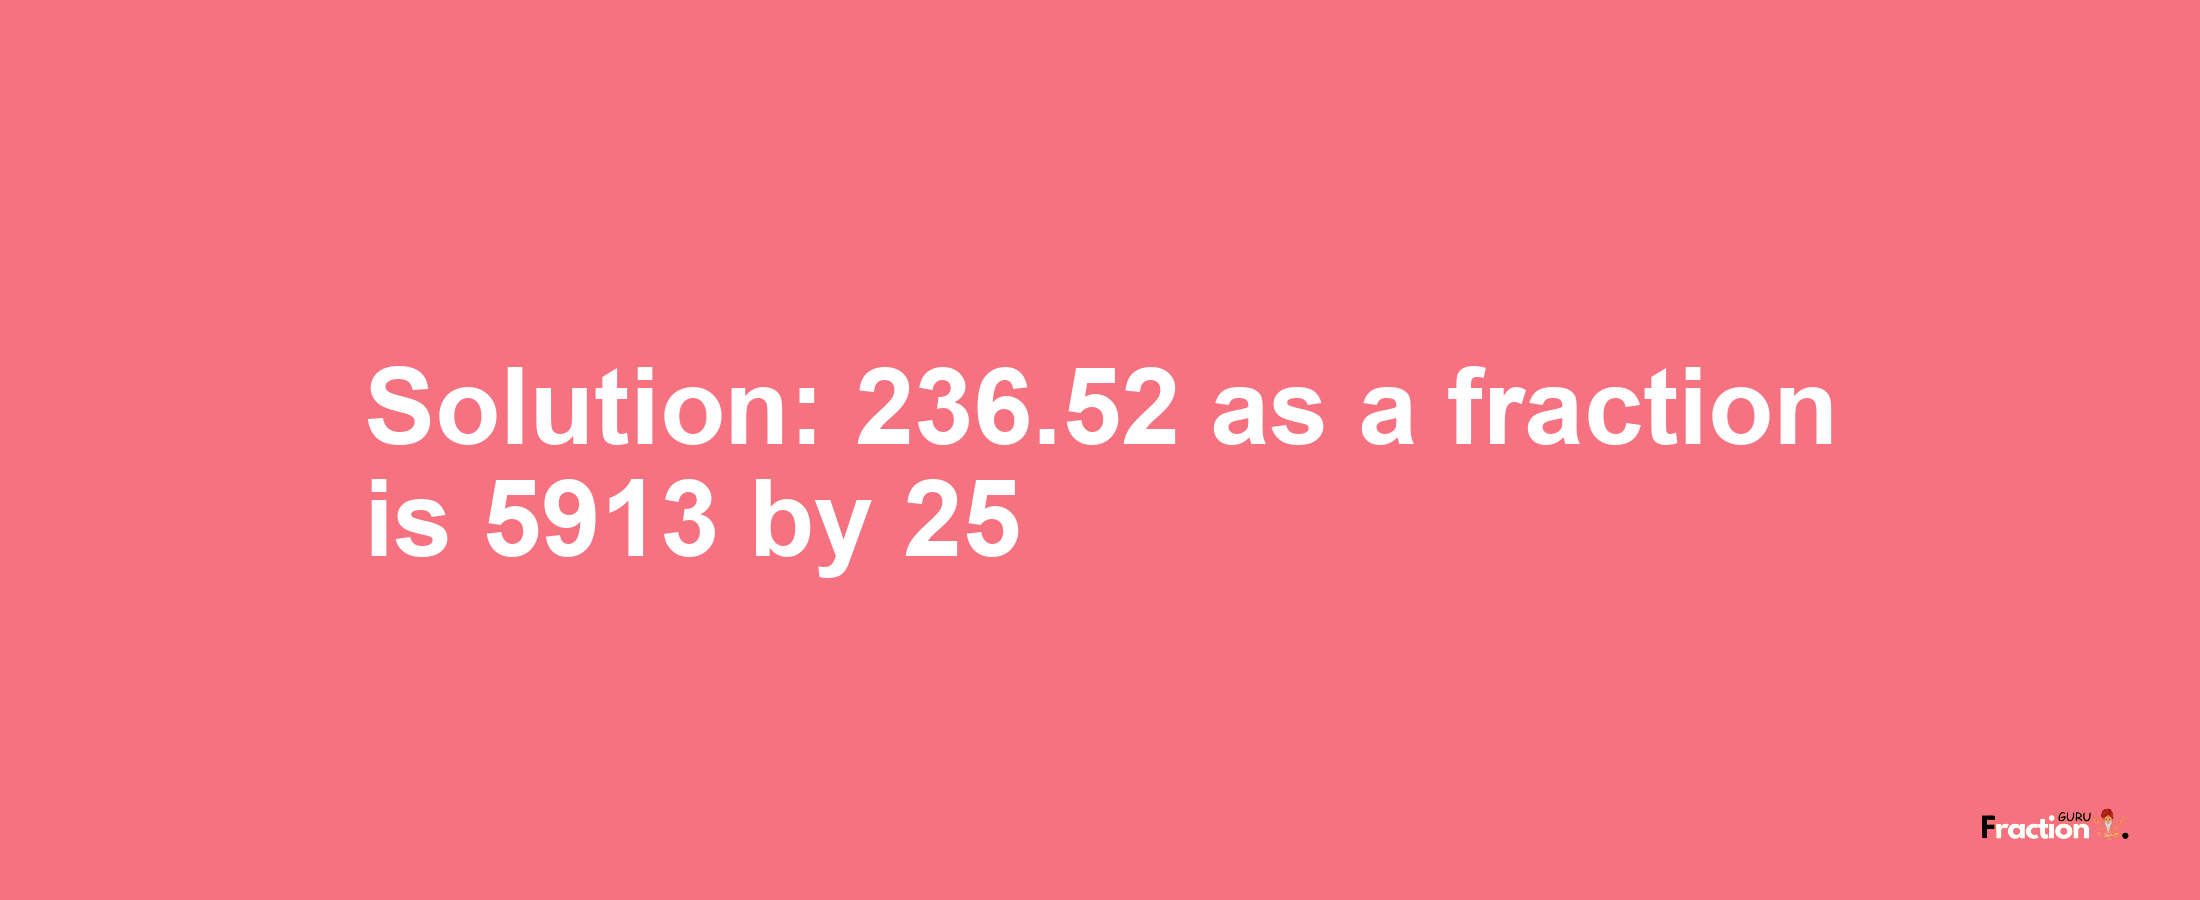 Solution:236.52 as a fraction is 5913/25